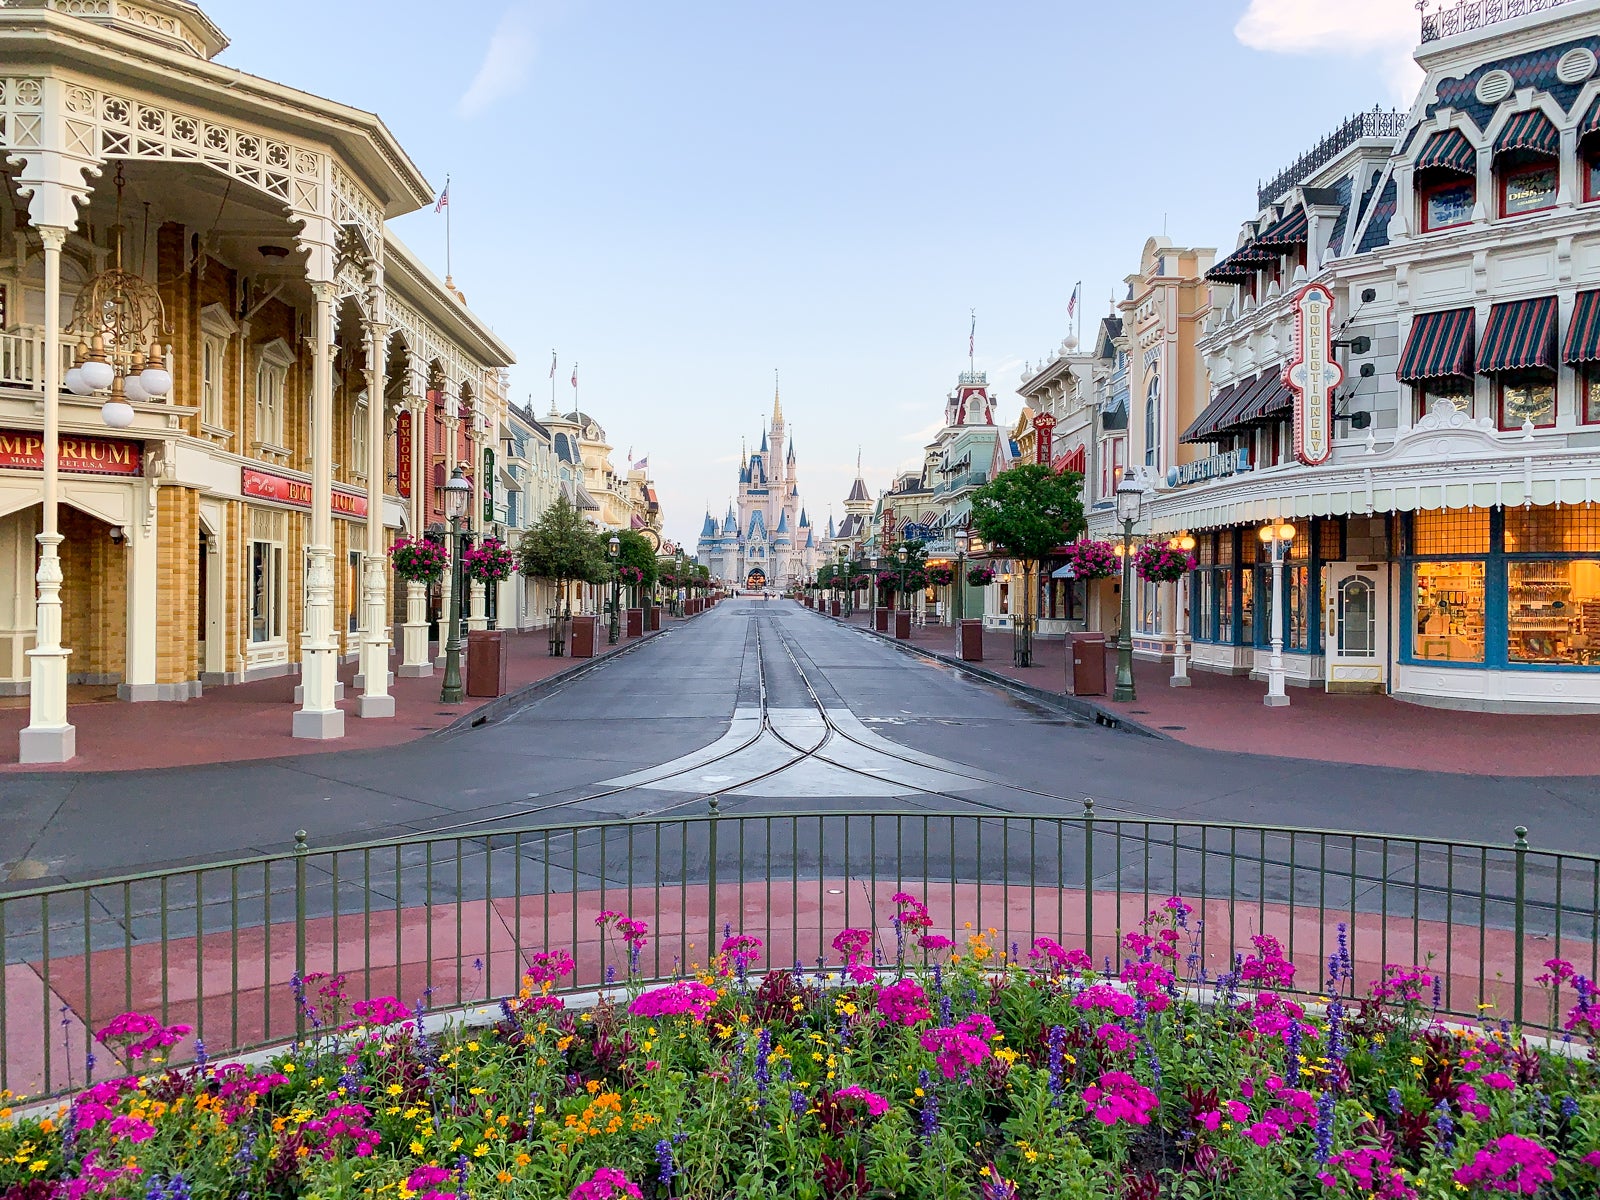 Reservations required into 2023: How to use Disney World’s park pass reservation system